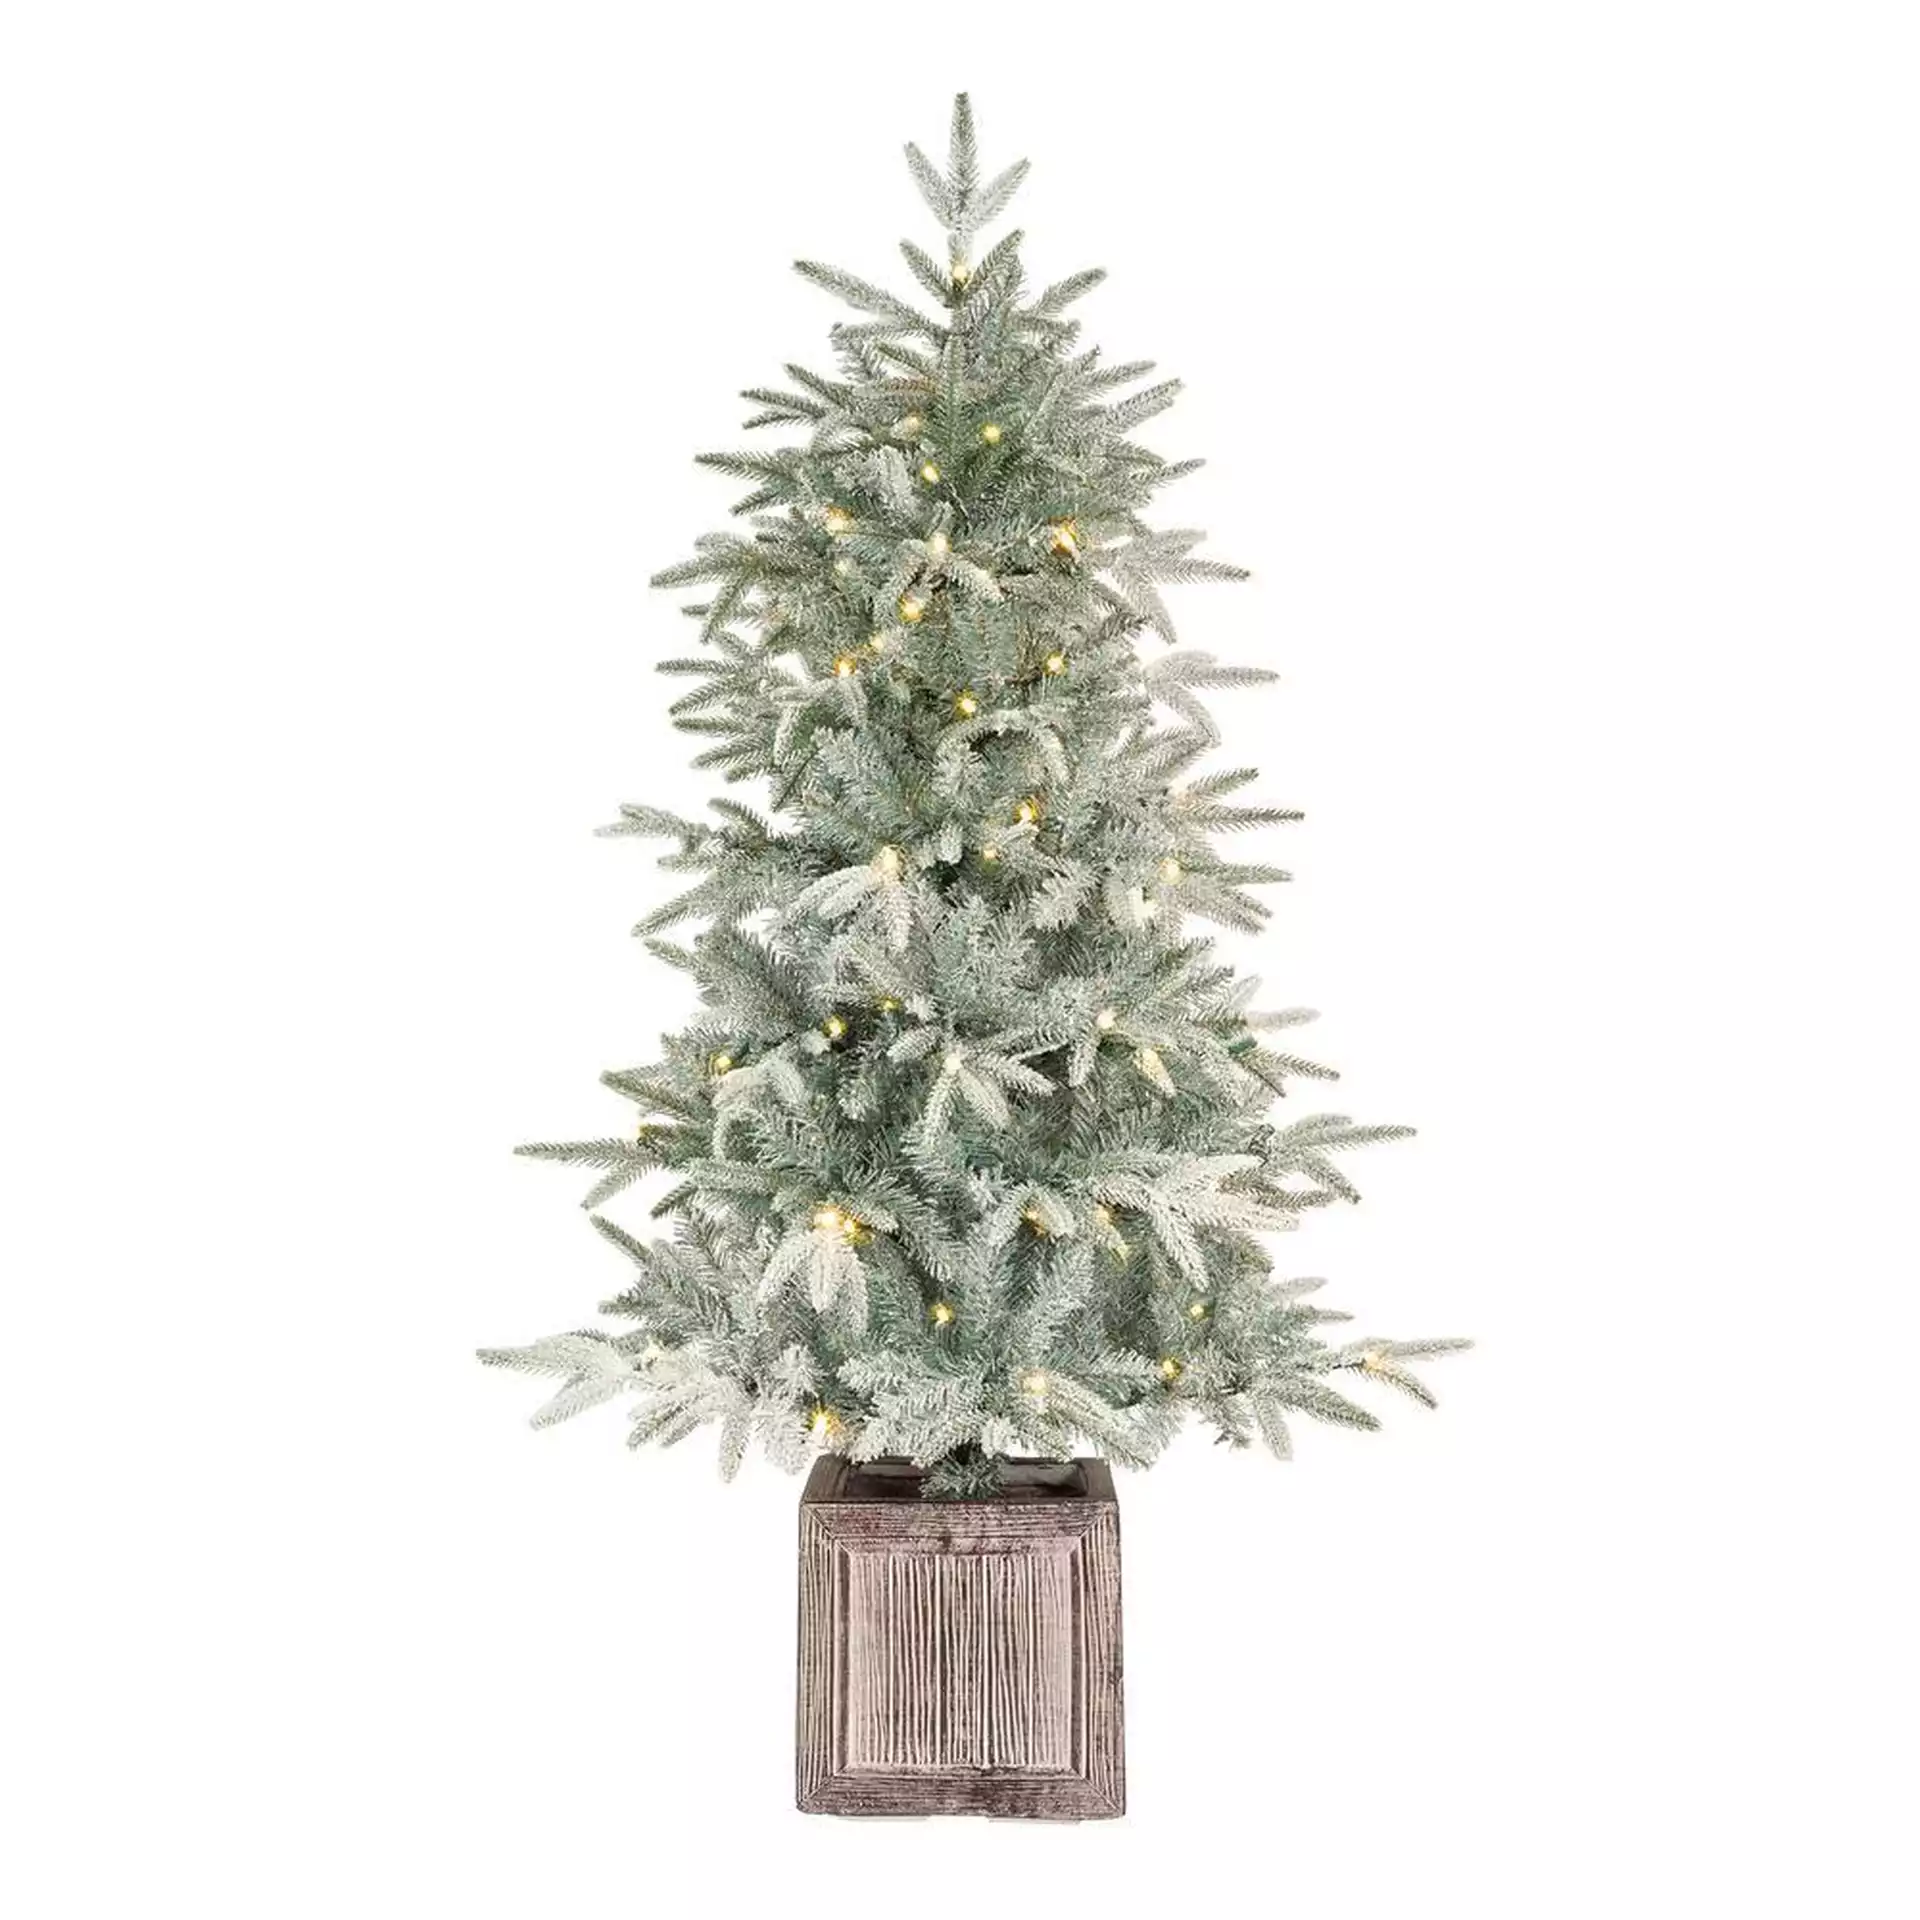 Home Accents Holiday 4.5 ft Pre-Lit Potted Artificial Christmas Tree with 100 White Lights